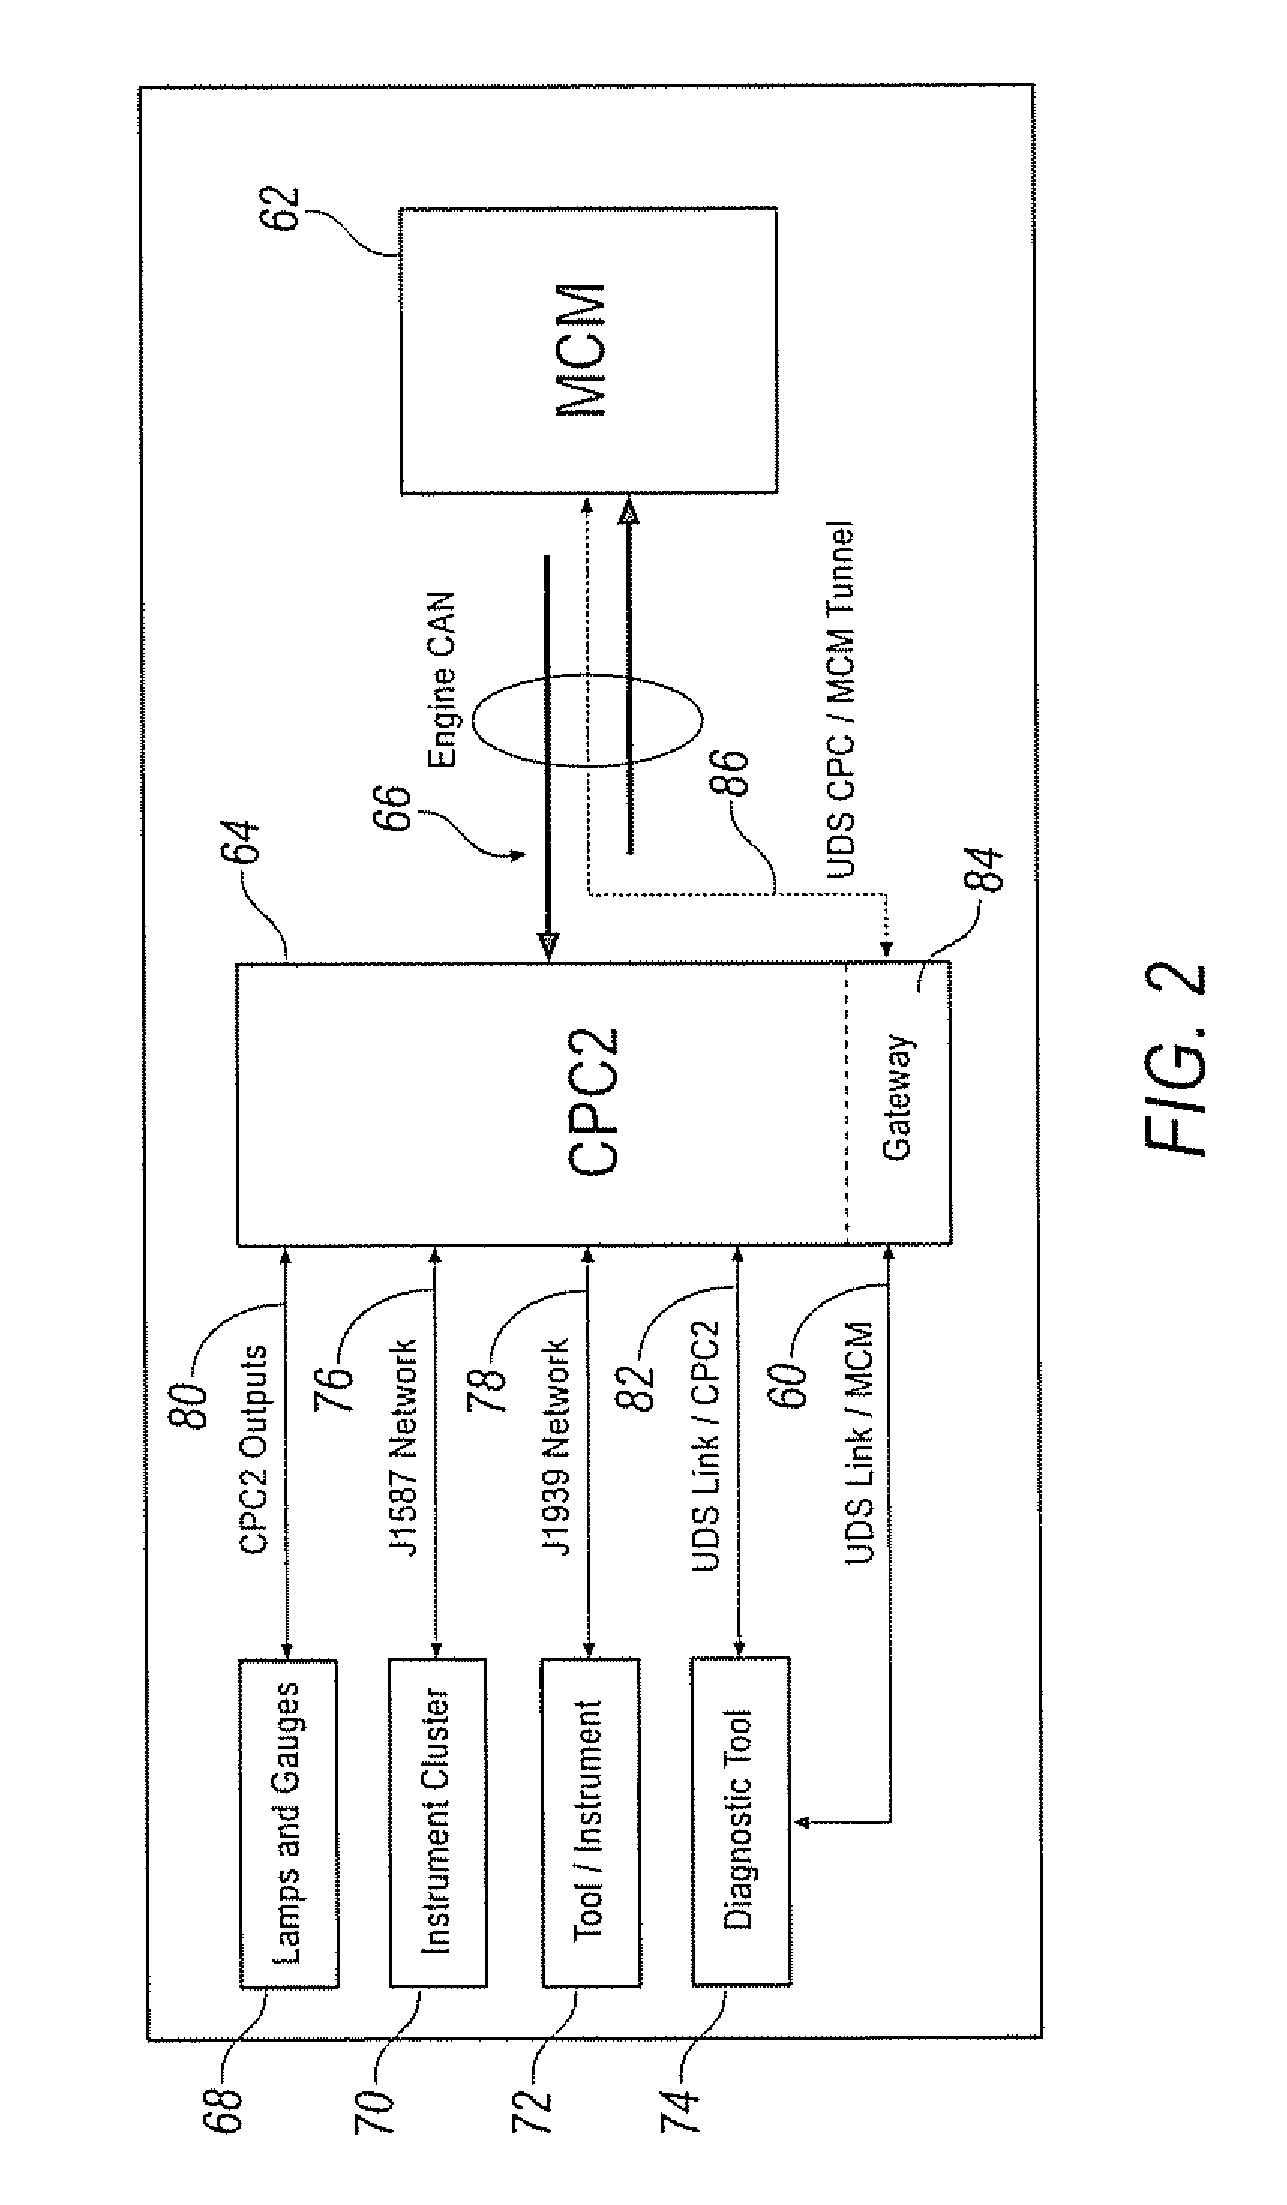 Method for optimizing cruise control fuel economy in heavy duty diesel engines